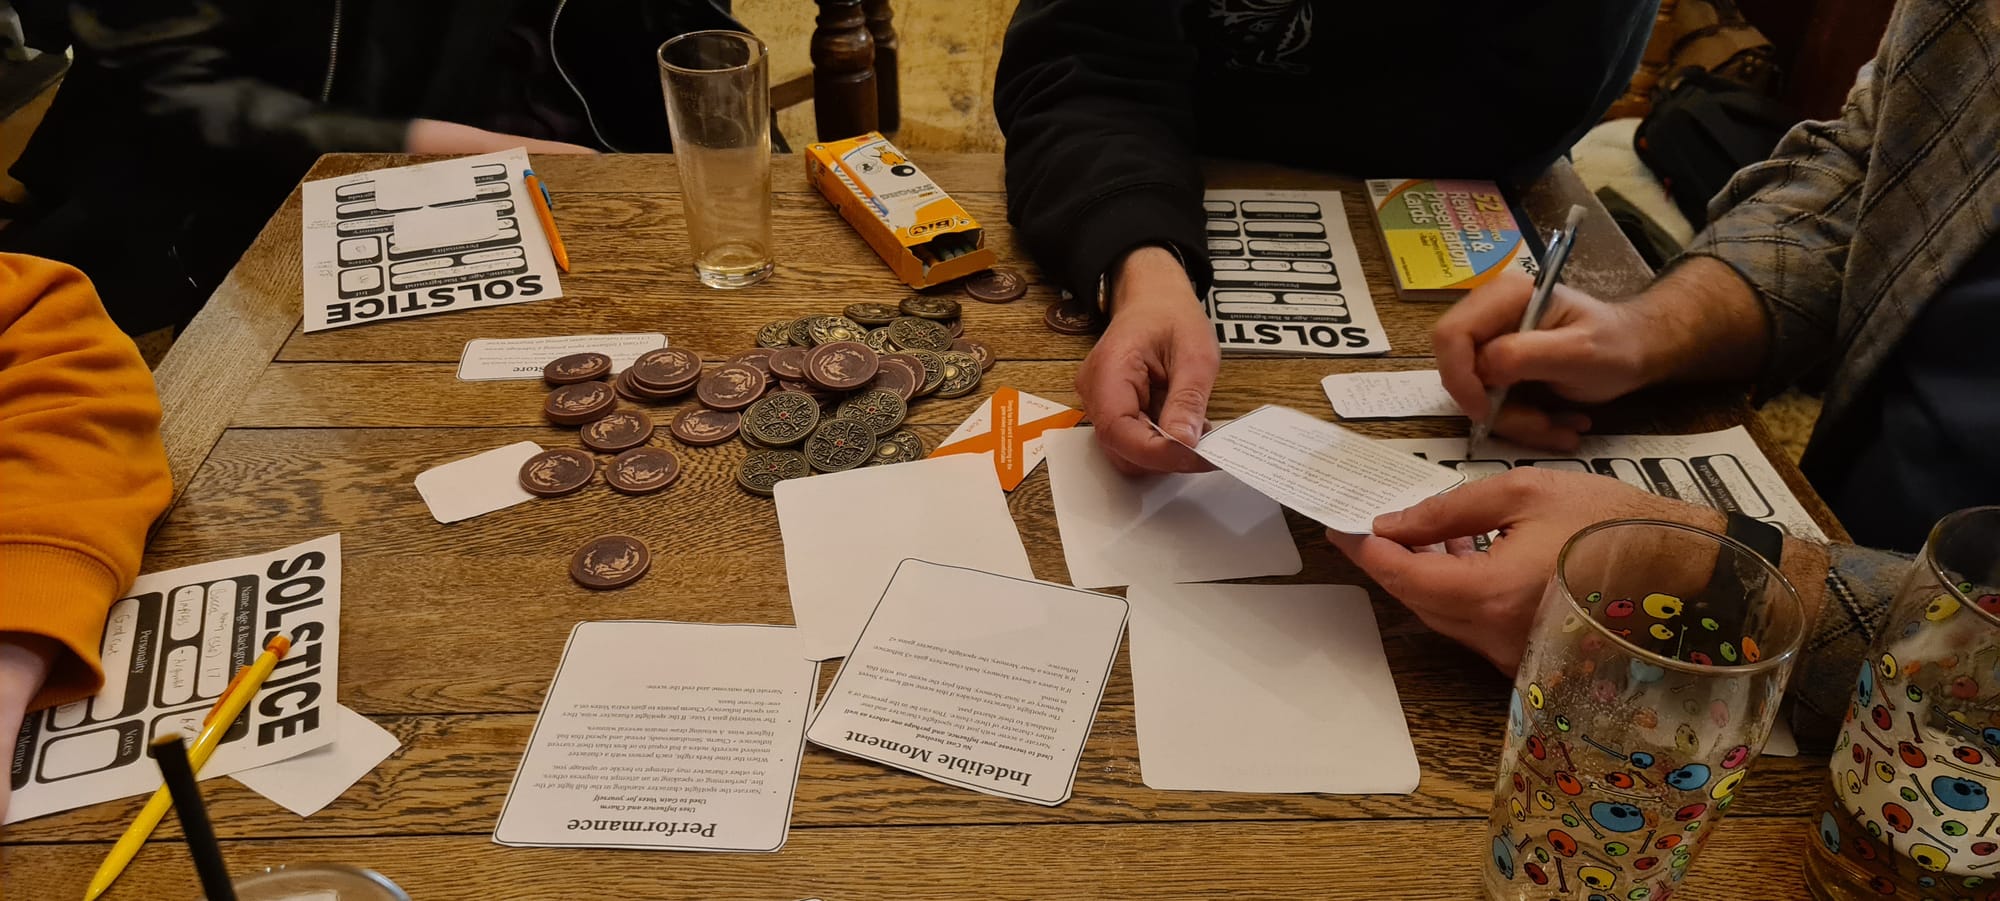 People sat at a pub table playing Solstice. The table is strewn with tokens, character sheets, game components cut from the book, and glasses. 